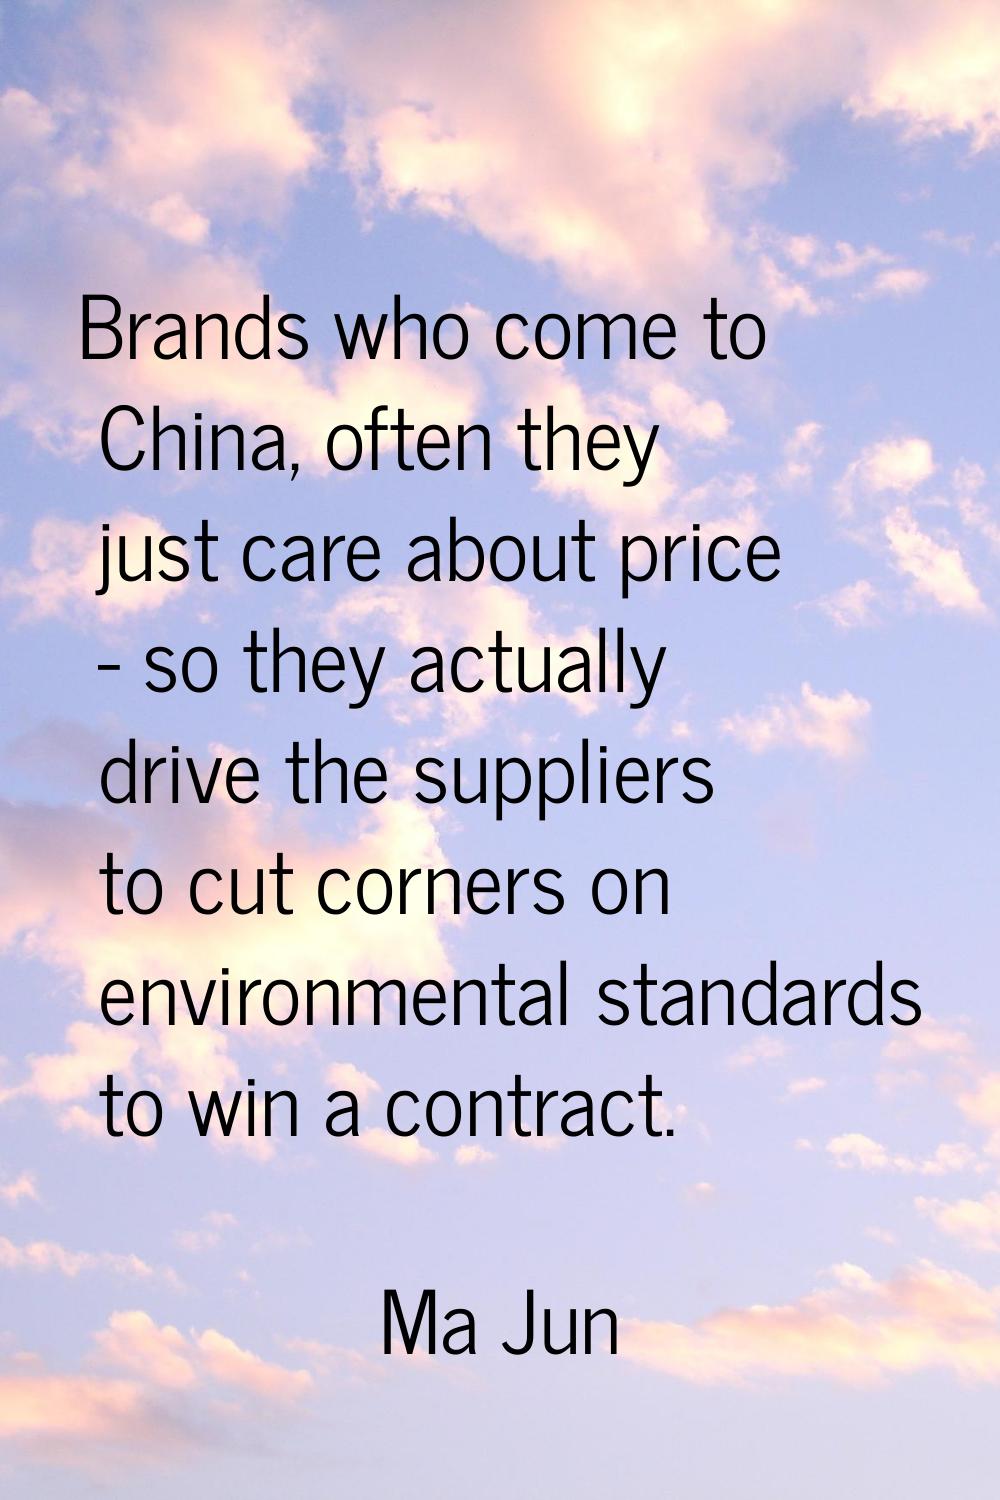 Brands who come to China, often they just care about price - so they actually drive the suppliers t